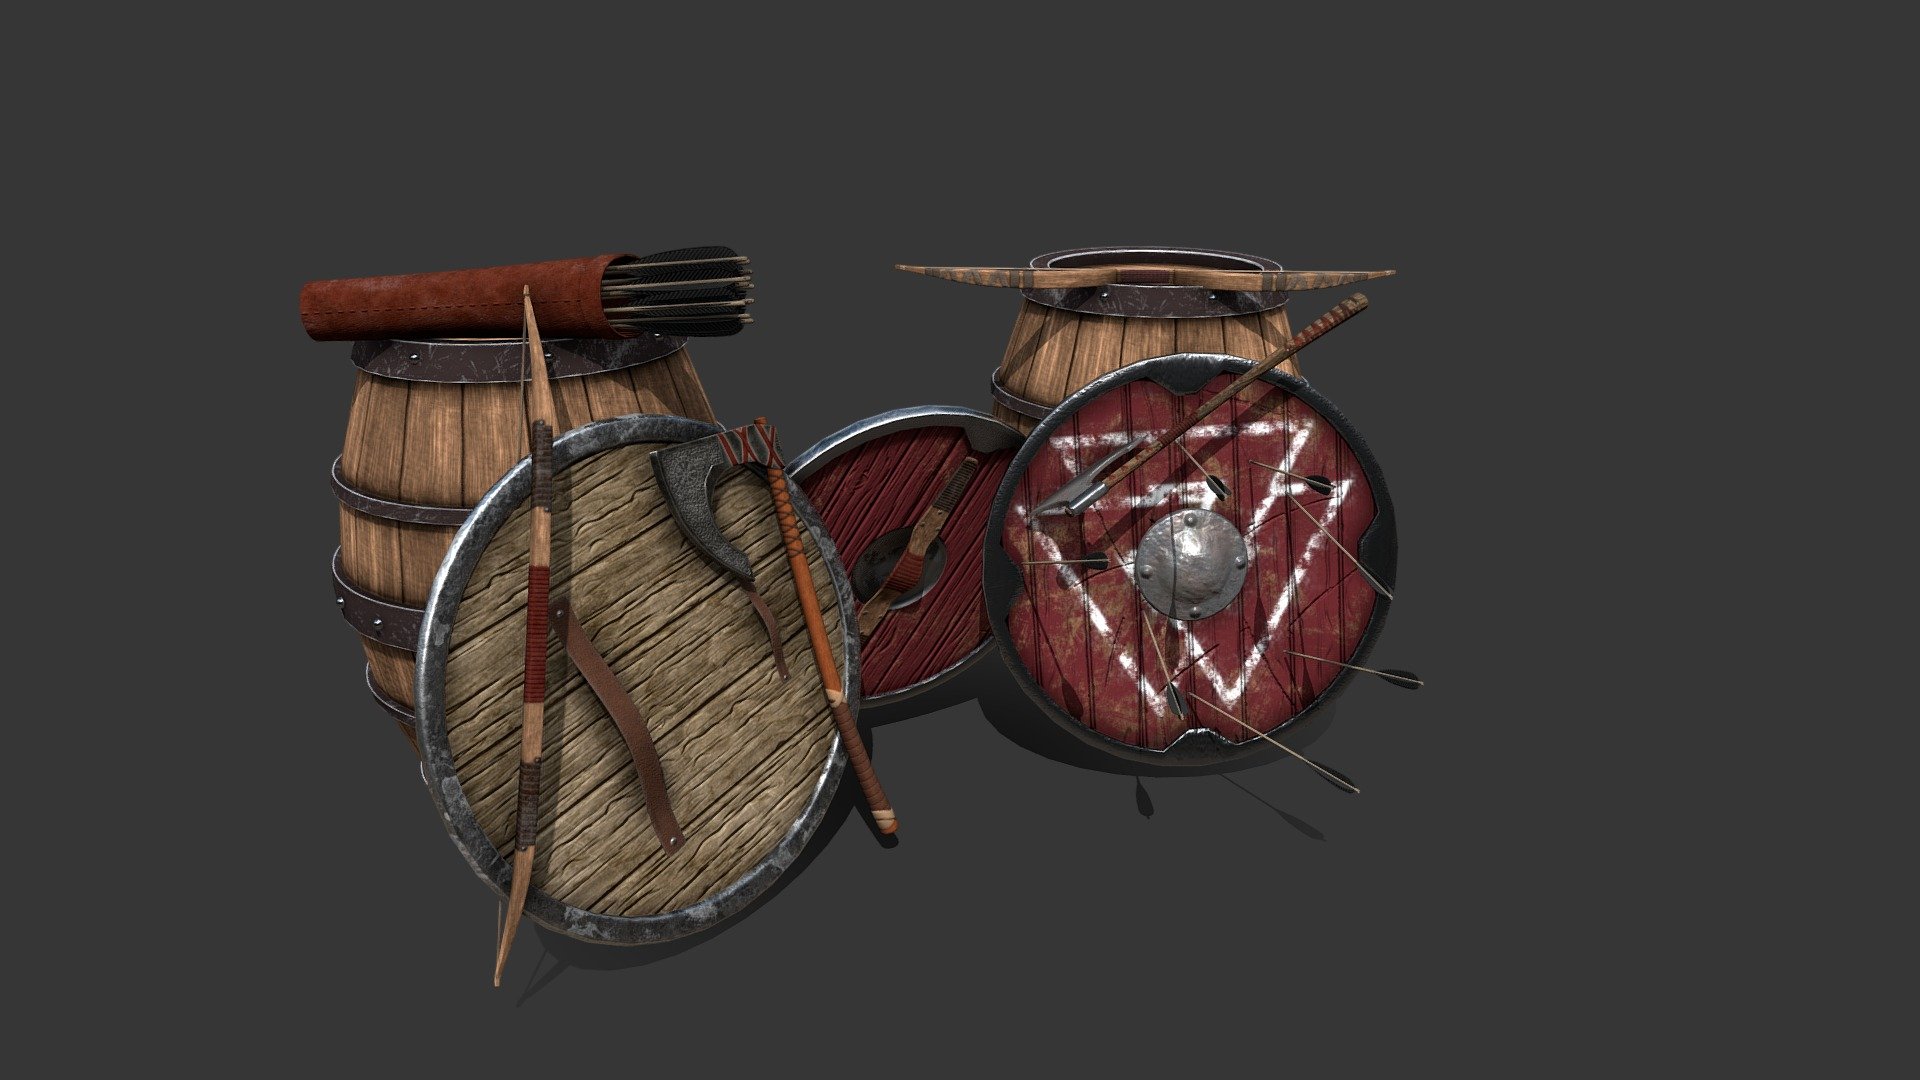 Weapons model for viking berserker/warrior created for Zerk Games Studio for the Arnheim MMO Project. Model created in a blender and textured in Substance Painter 3d model